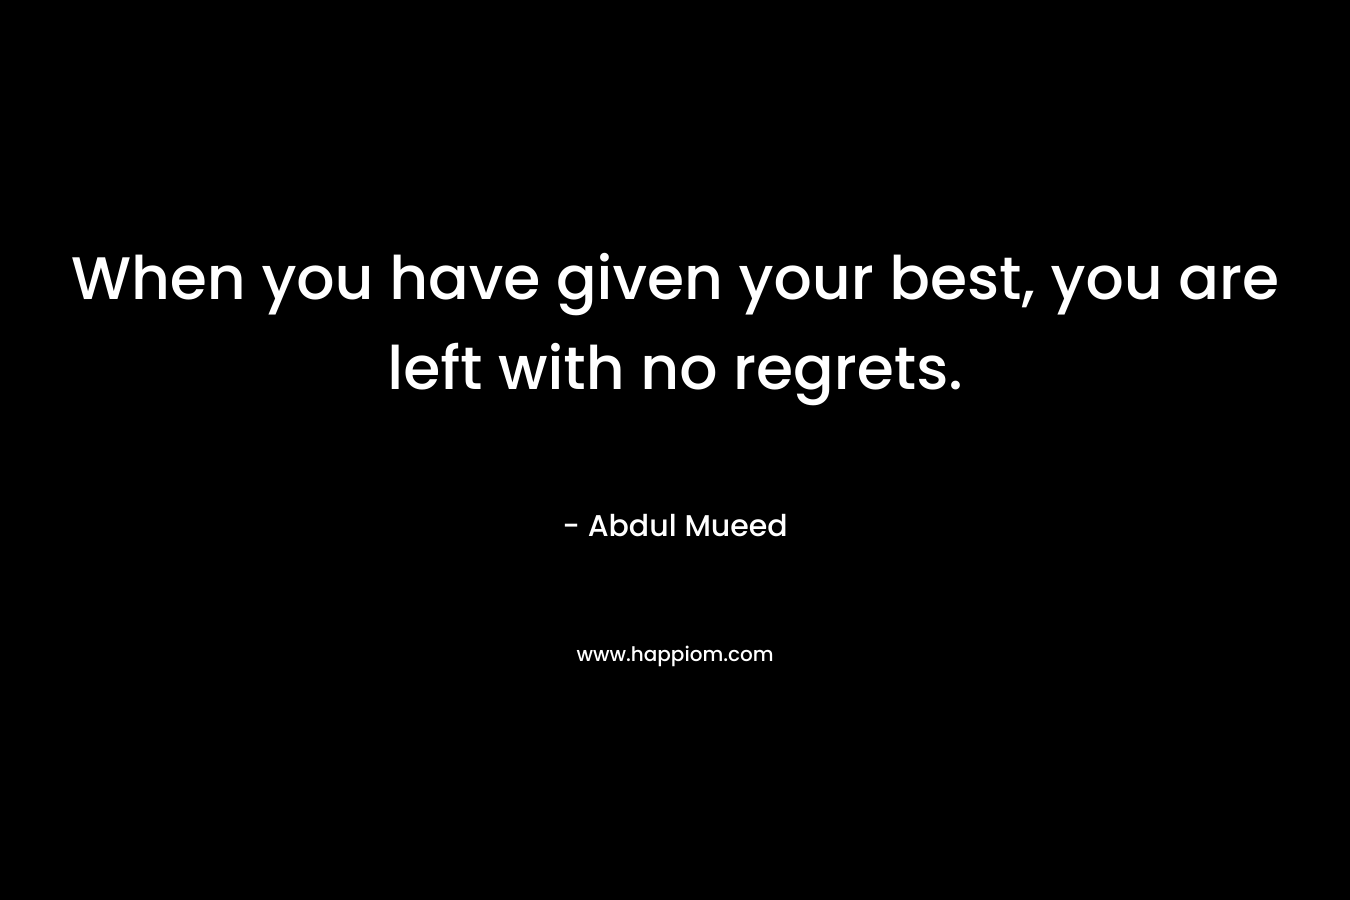 When you have given your best, you are left with no regrets. – Abdul Mueed